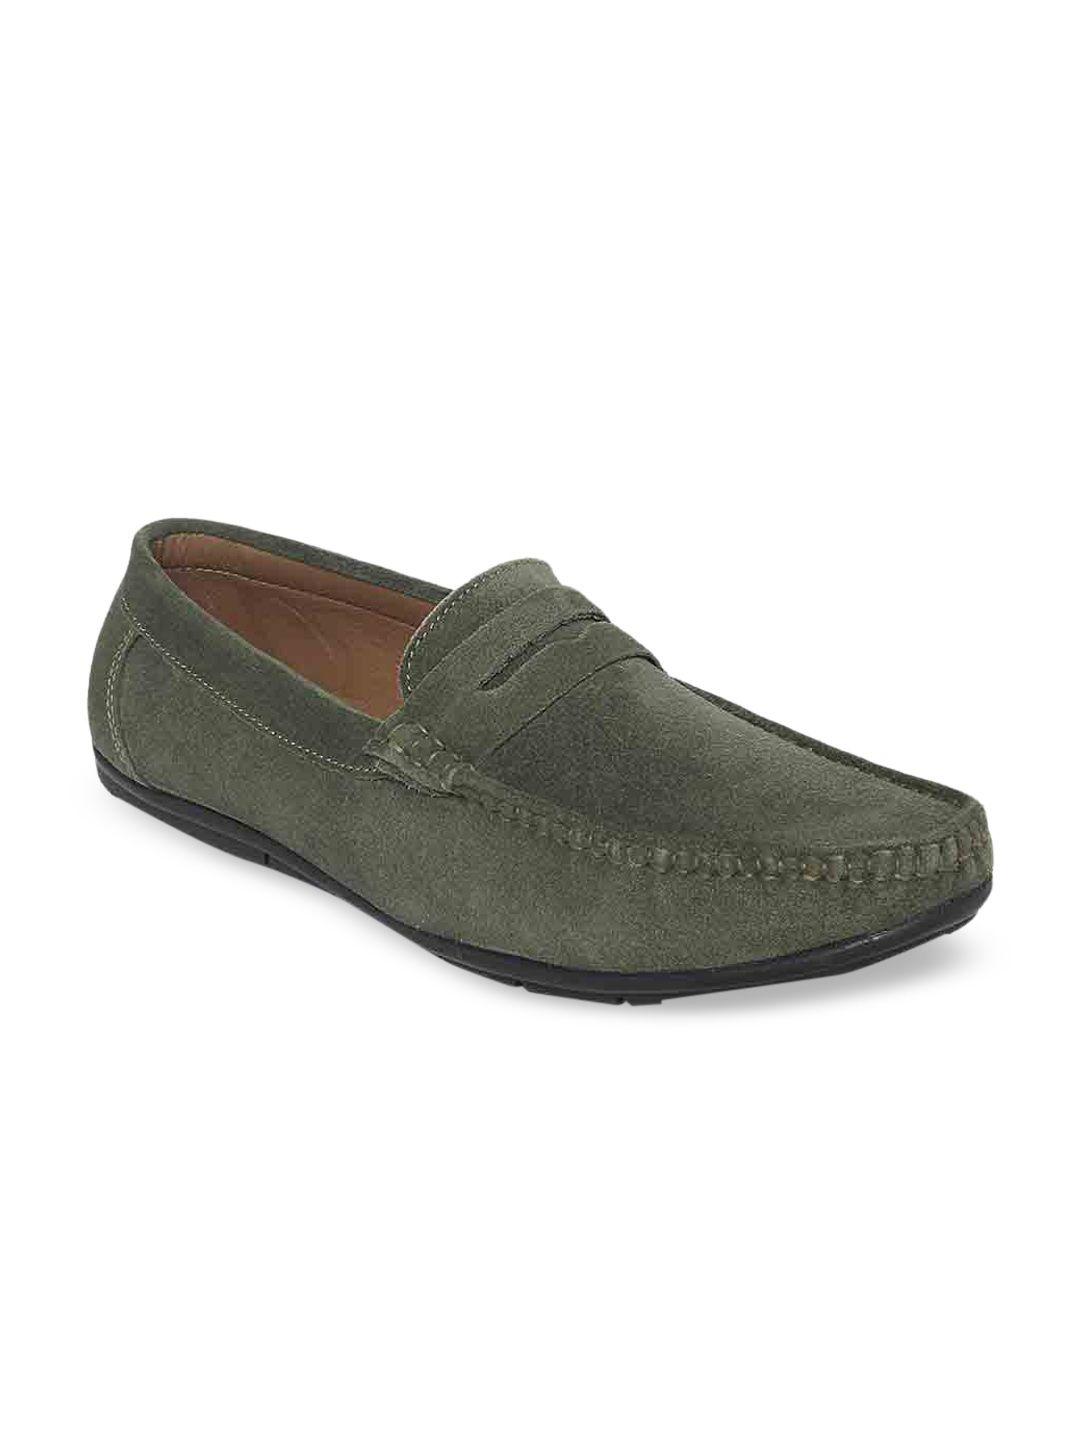 louis stitch men green textured leather casual loafers